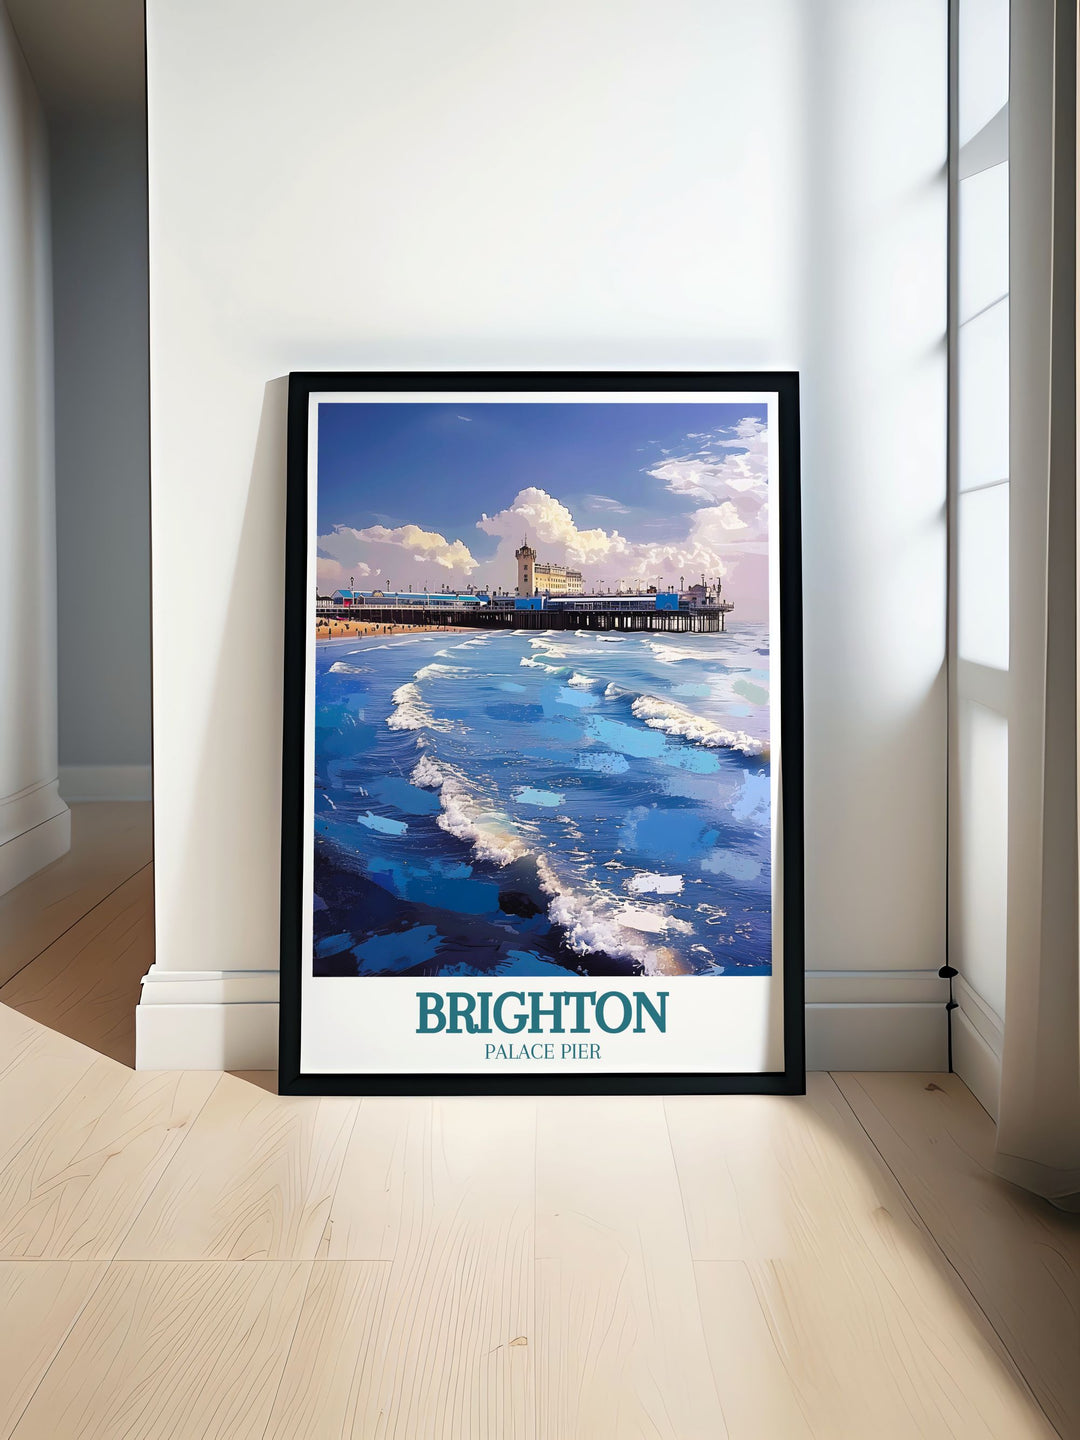 Brighton Pier Poster showcasing the iconic Brighton Palace Pier and the serene English Channel a stunning Art Deco print that brings a touch of vintage travel charm to your home decor or serves as a unique gift for retro poster enthusiasts.